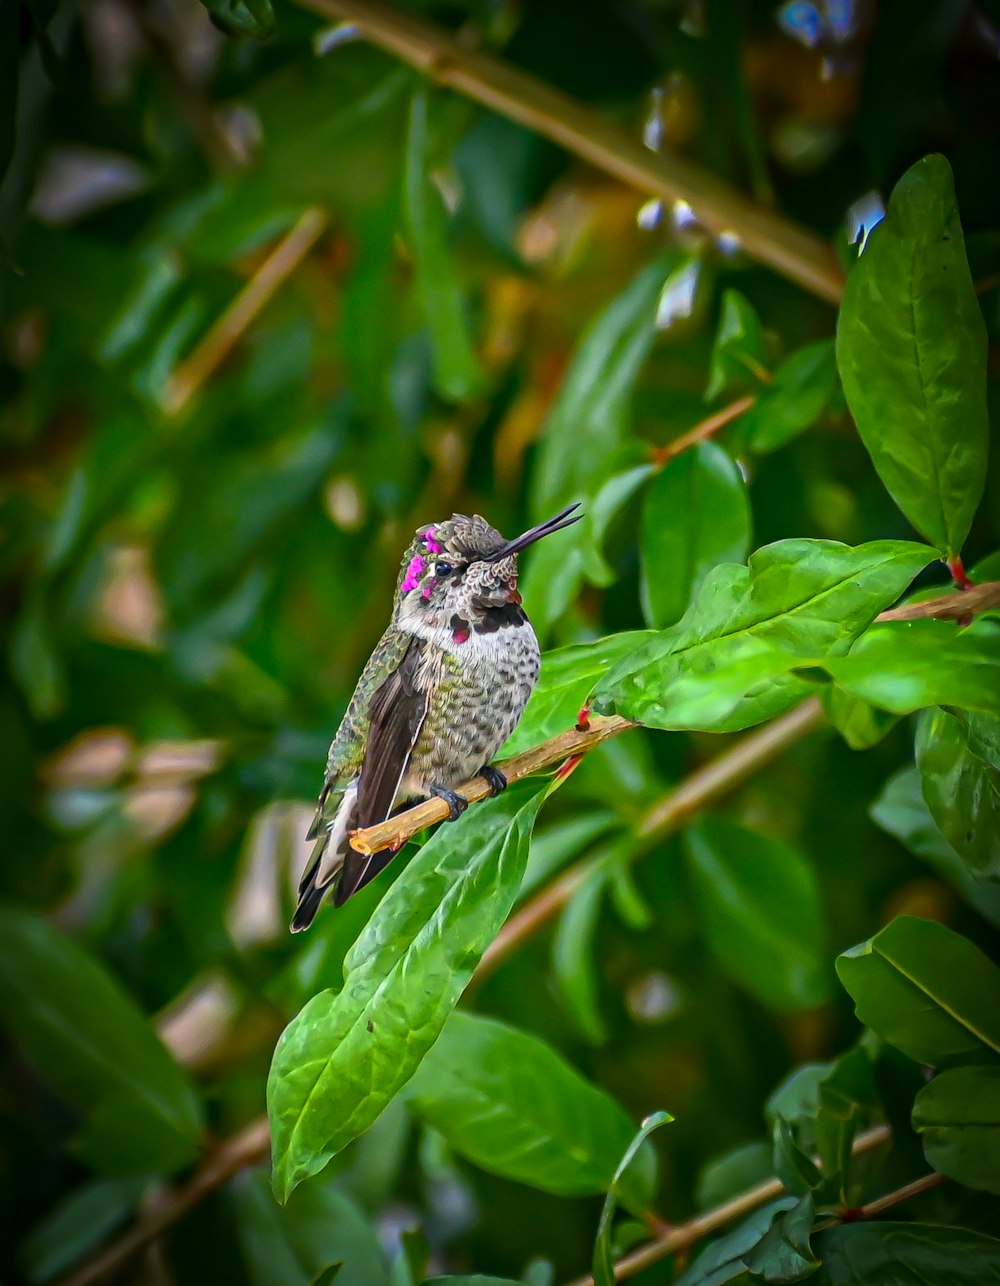 a small bird perched on a green leafy branch